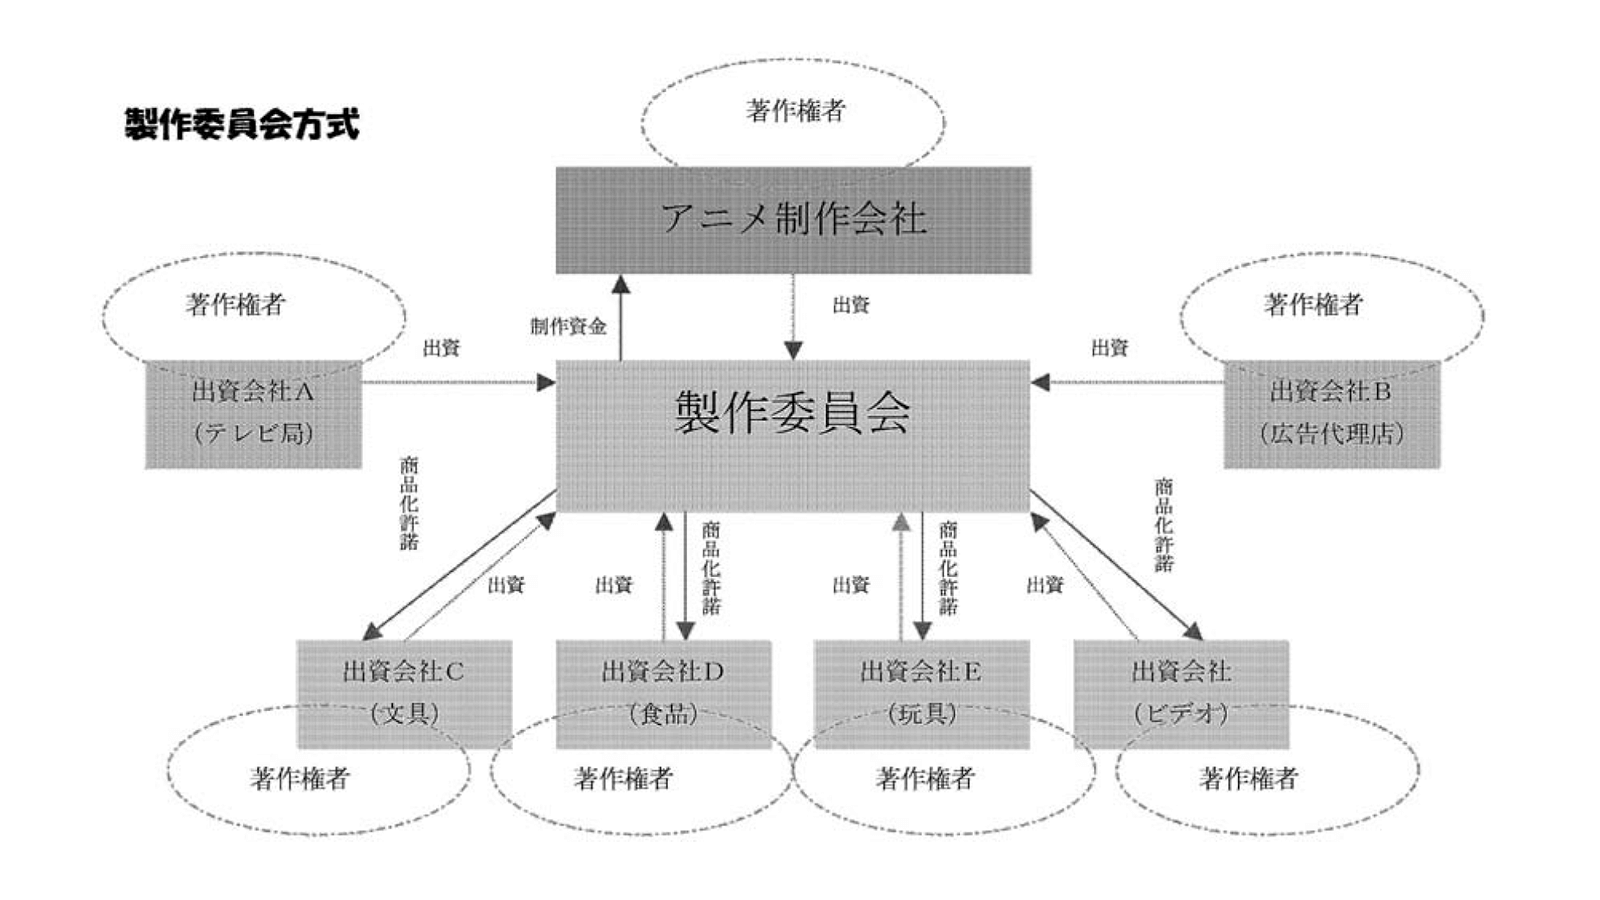 https://system.jpaa.or.jp/patents_files_old/200808/jpaapatent200808_011-047.pdf 2020年1月24日最終アクセス